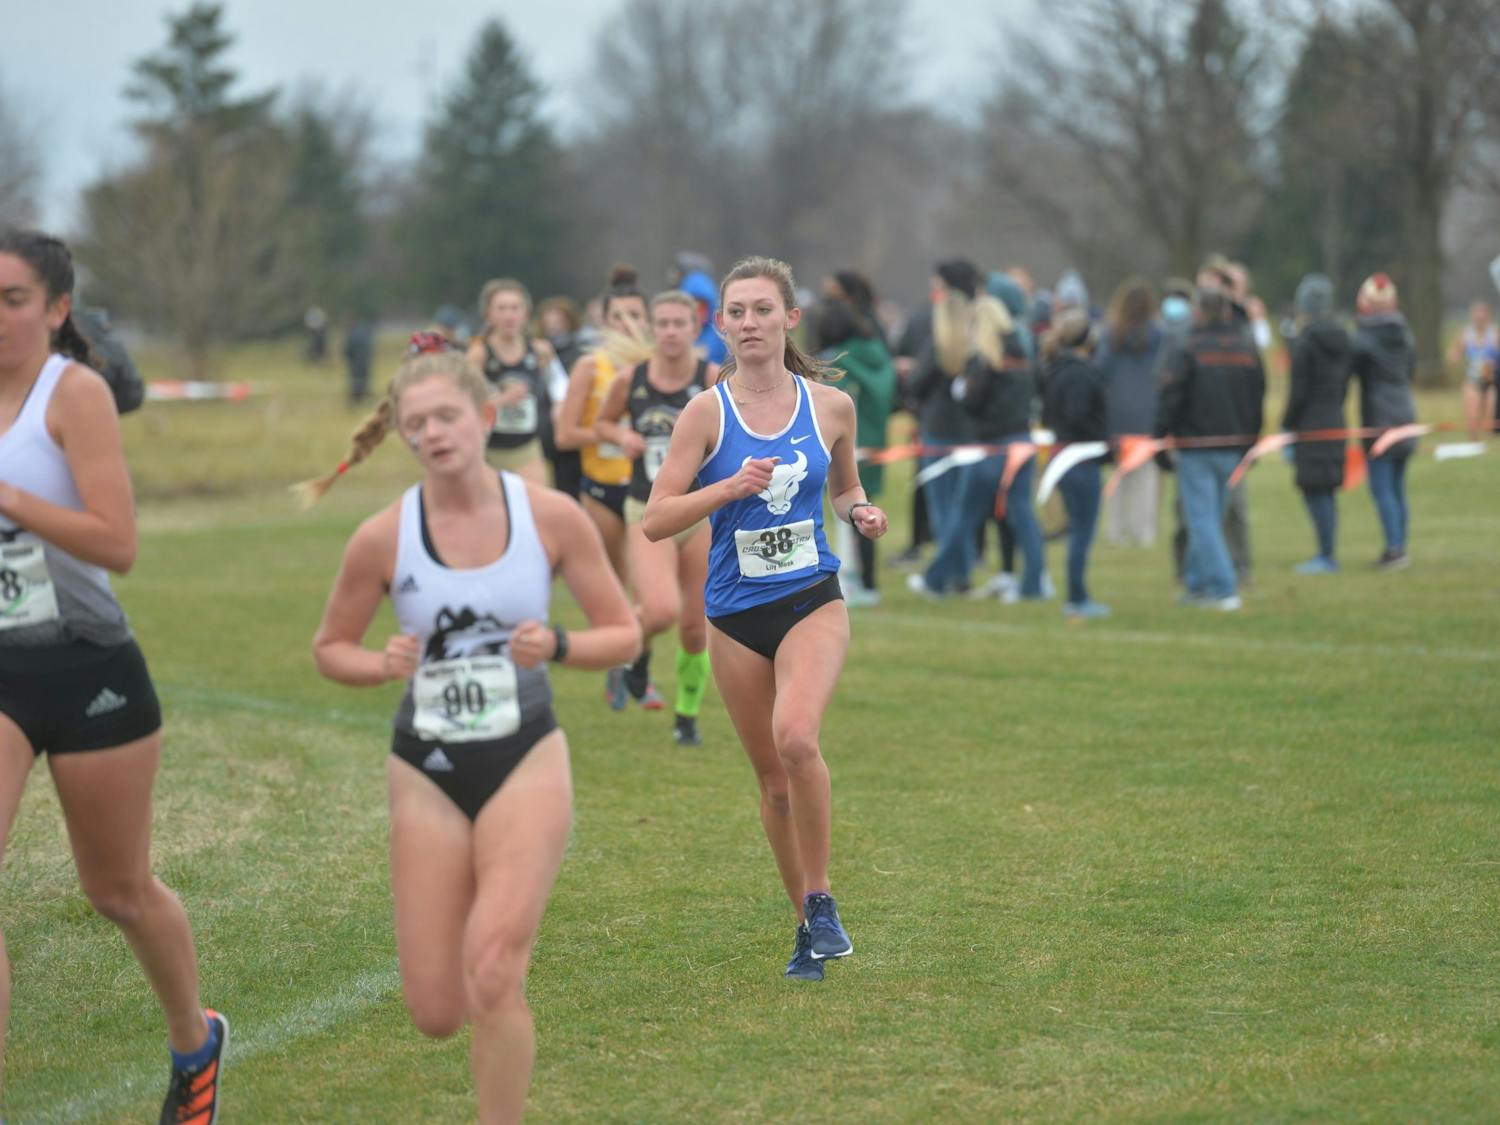 The women’s team came in last in a field of twelve teams at the MAC Cross Country Championship